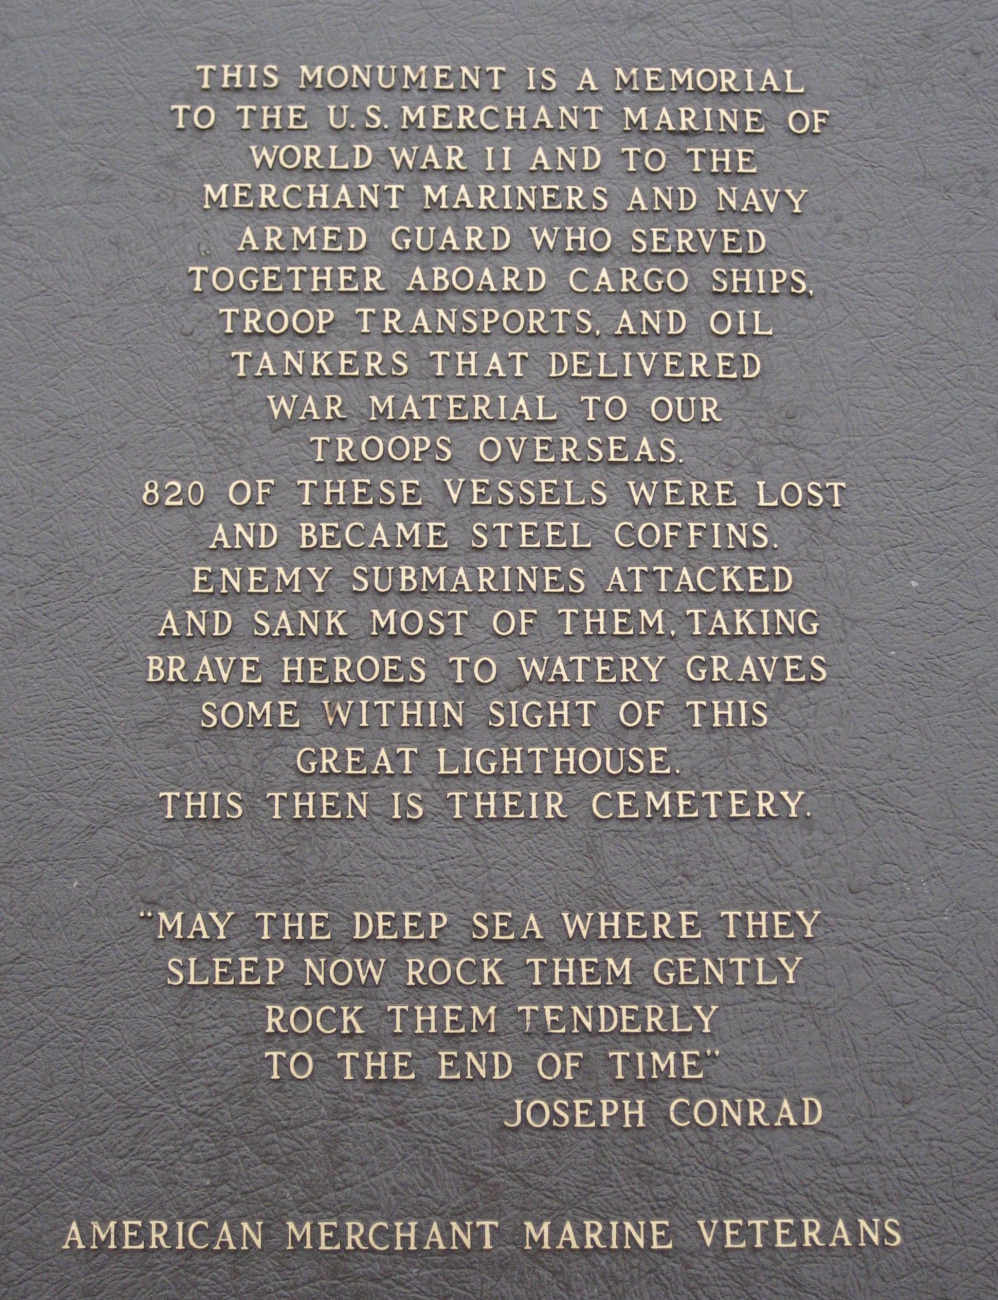 Memorial to the merchant seamen of World War II who lost their lives as a resultof that conflict